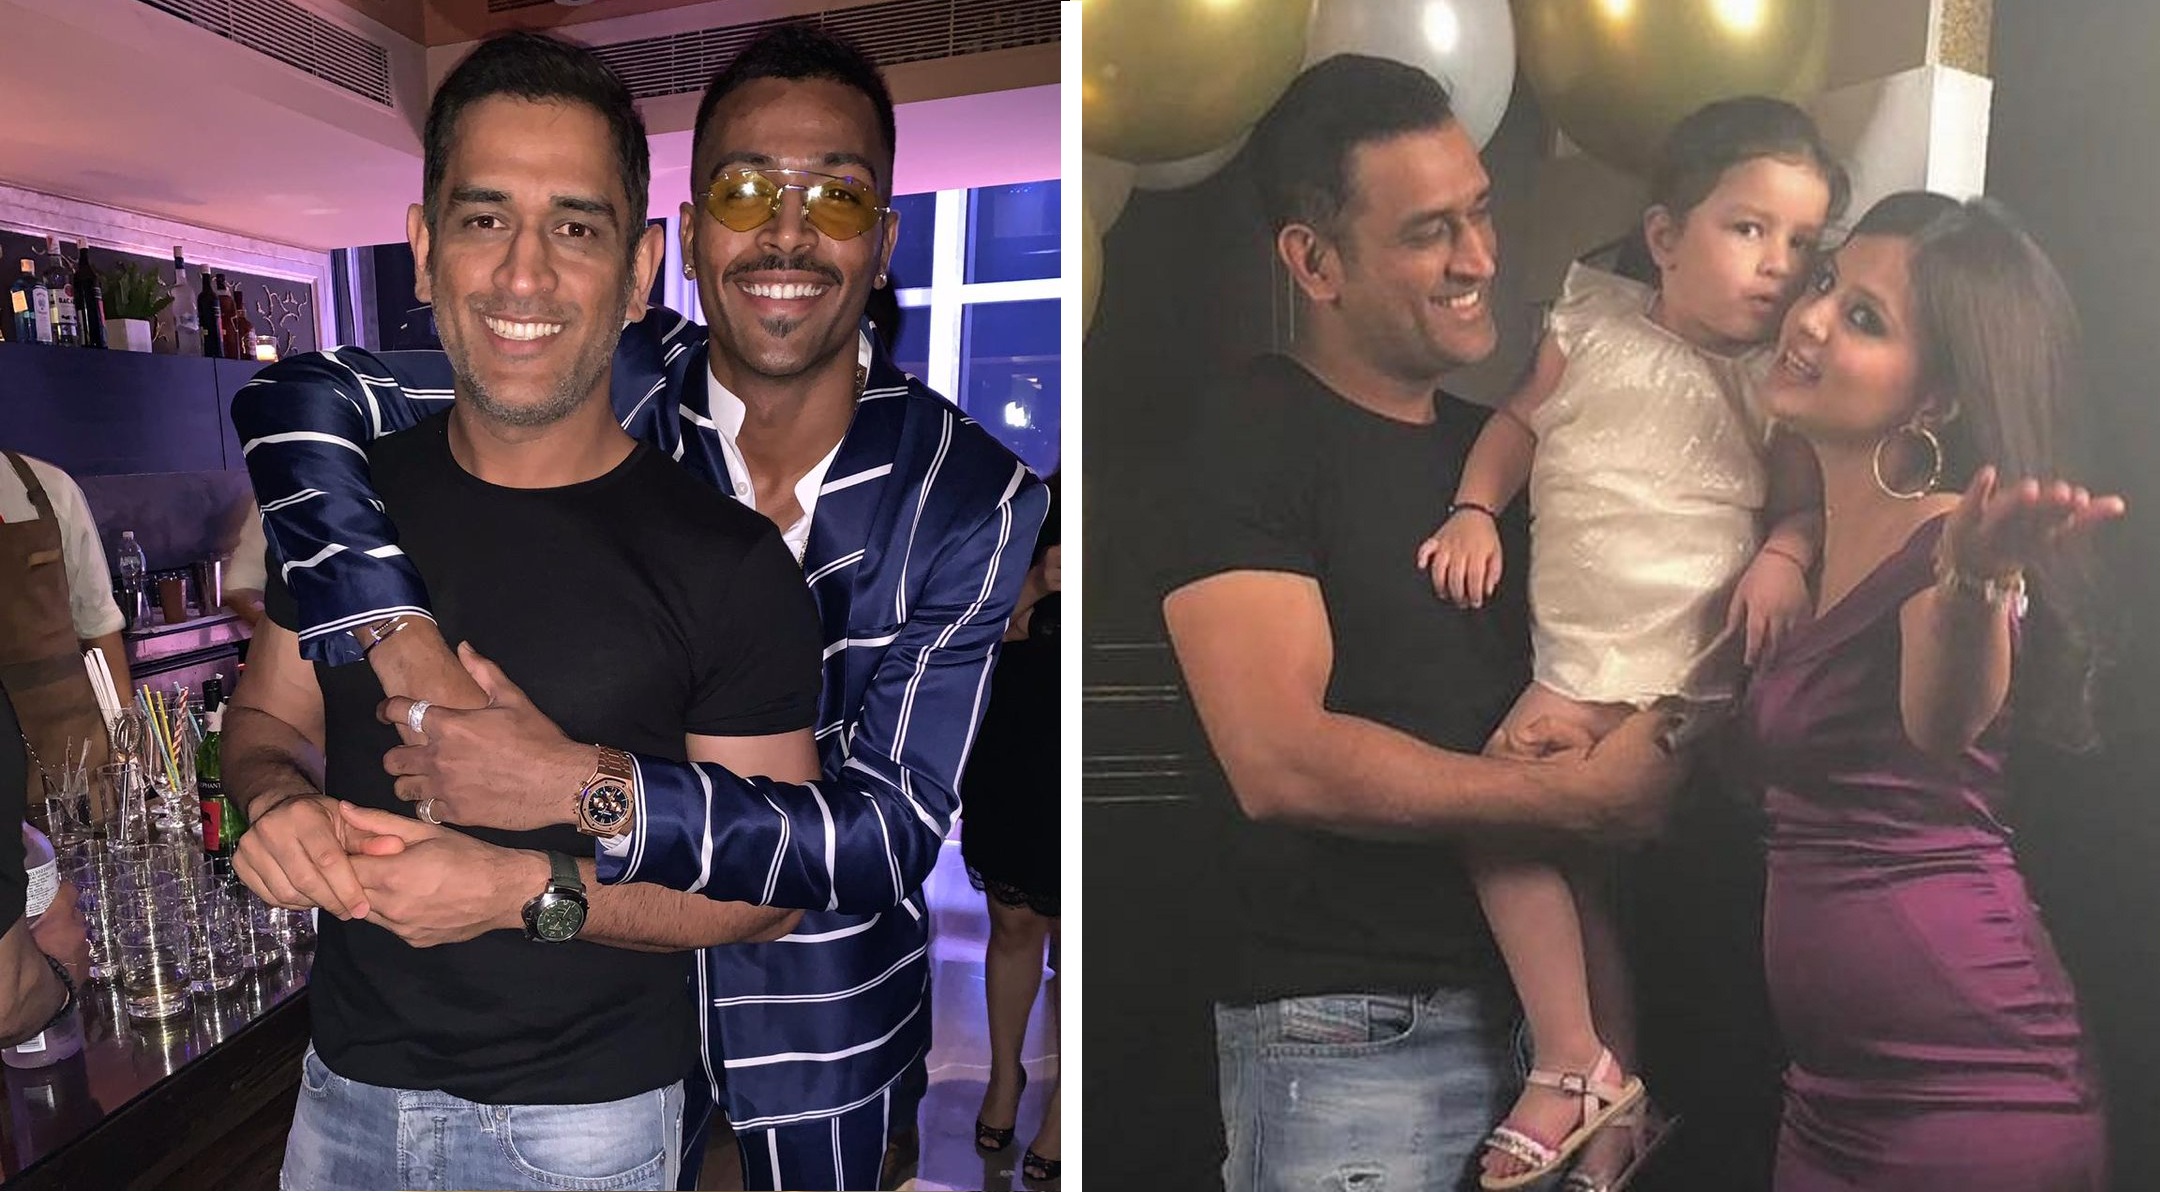 Pics: MS Dhoni Throws A Happening Bash For Wife Sakshi’s 30th Birthday, Hardik Pandya Joins The Celebration